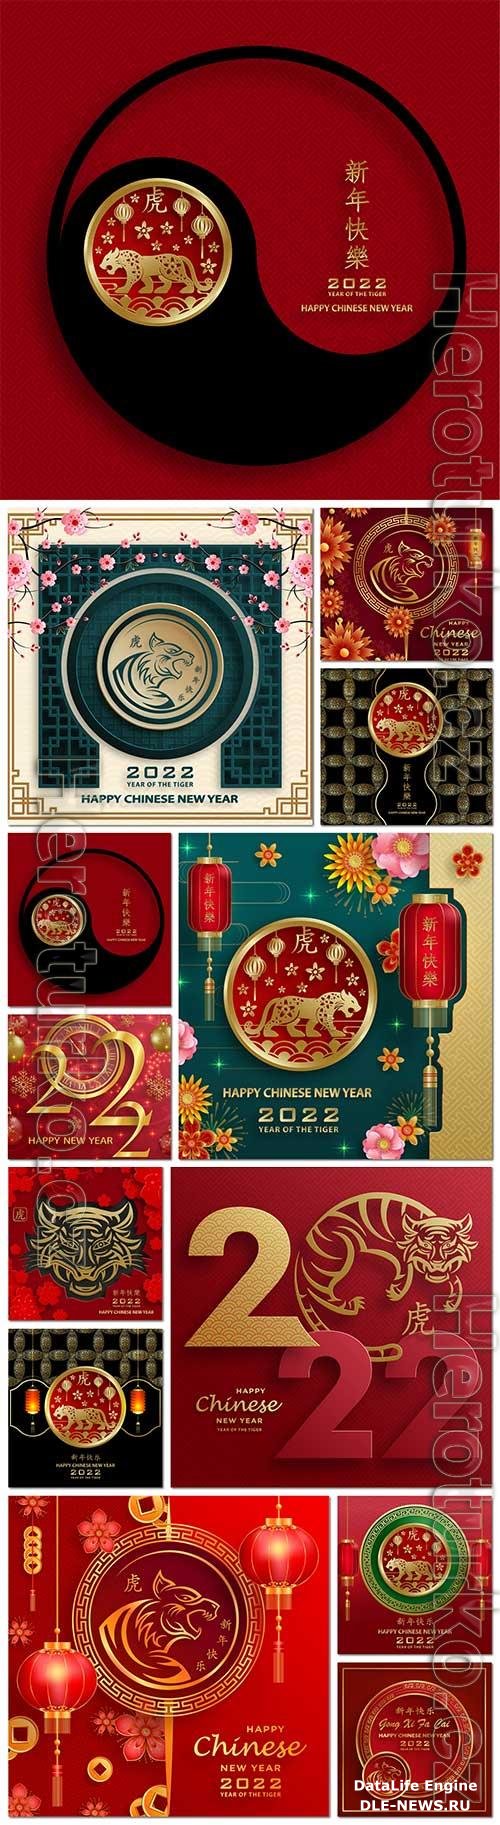 2022 happy chinese new year, tiger zodiac sign